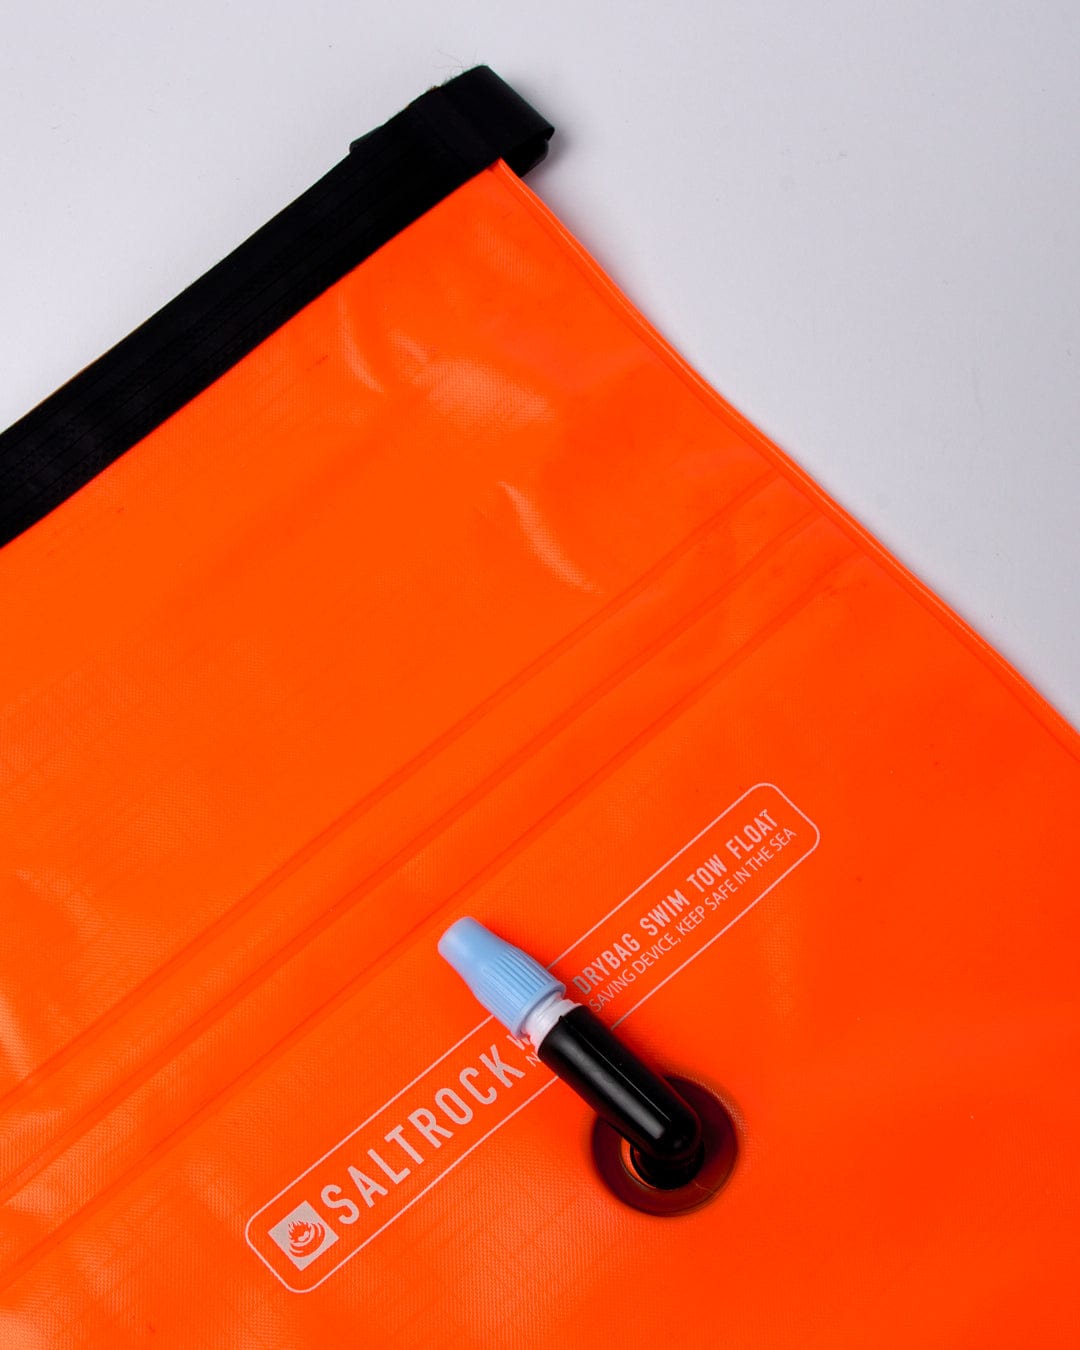 A bright orange Saltrock waterproof Wild dry bag with a blue sealing clip, ideal for cold water swimming.